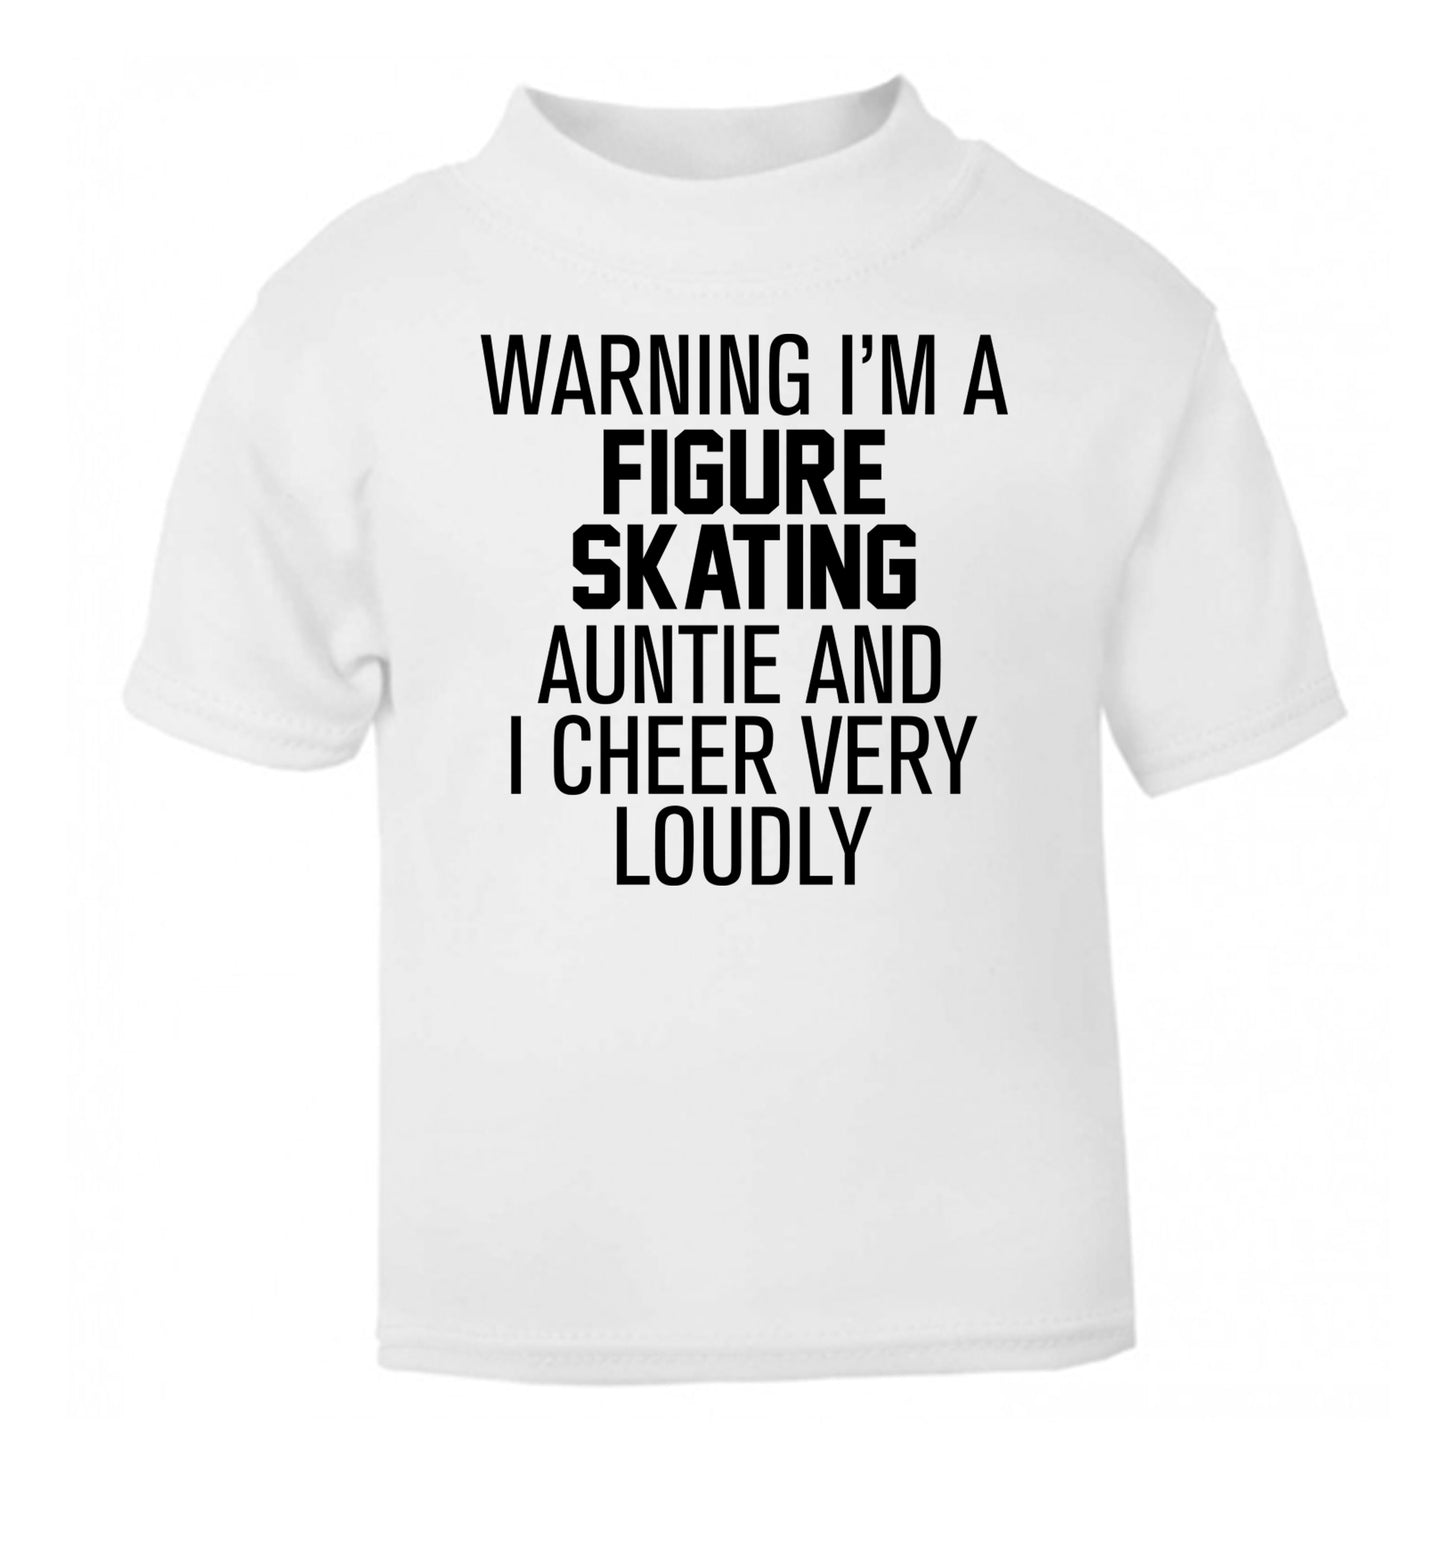 Warning I'm a figure skating auntie and I cheer very loudly white Baby Toddler Tshirt 2 Years